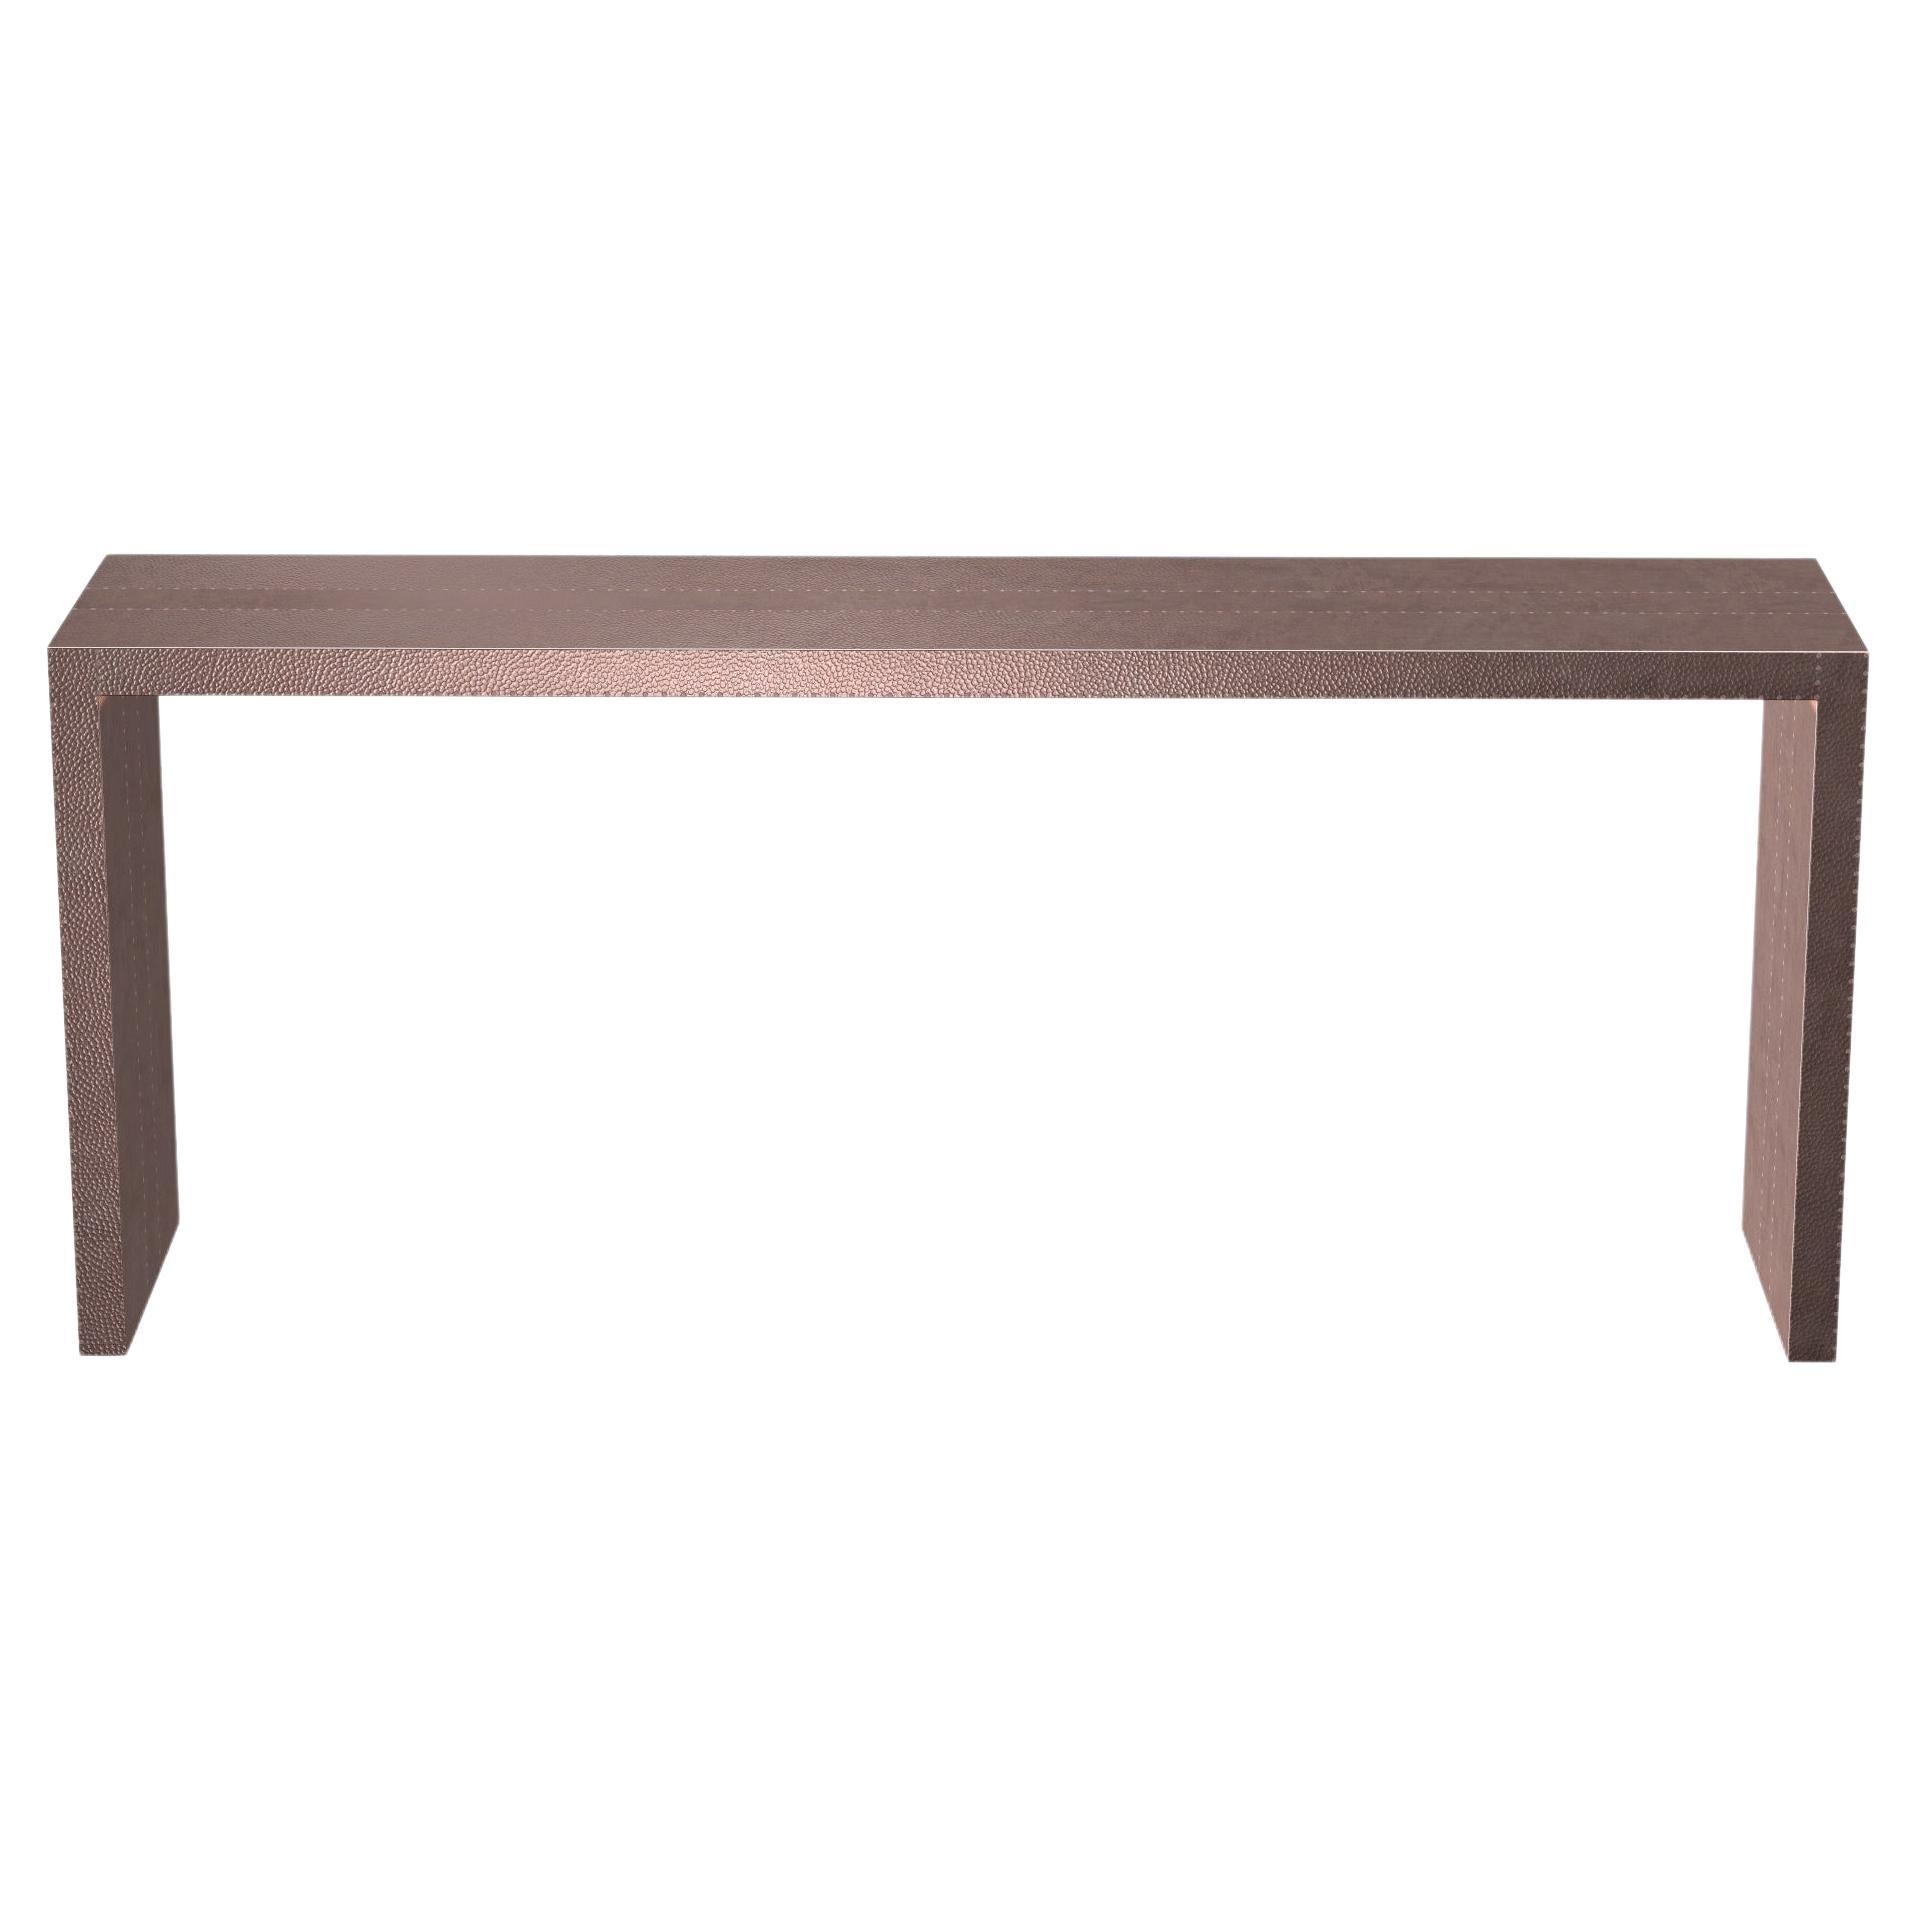 Art Nouveau Tray Console Tables Mid.Hammered in Copper by Alison Spear